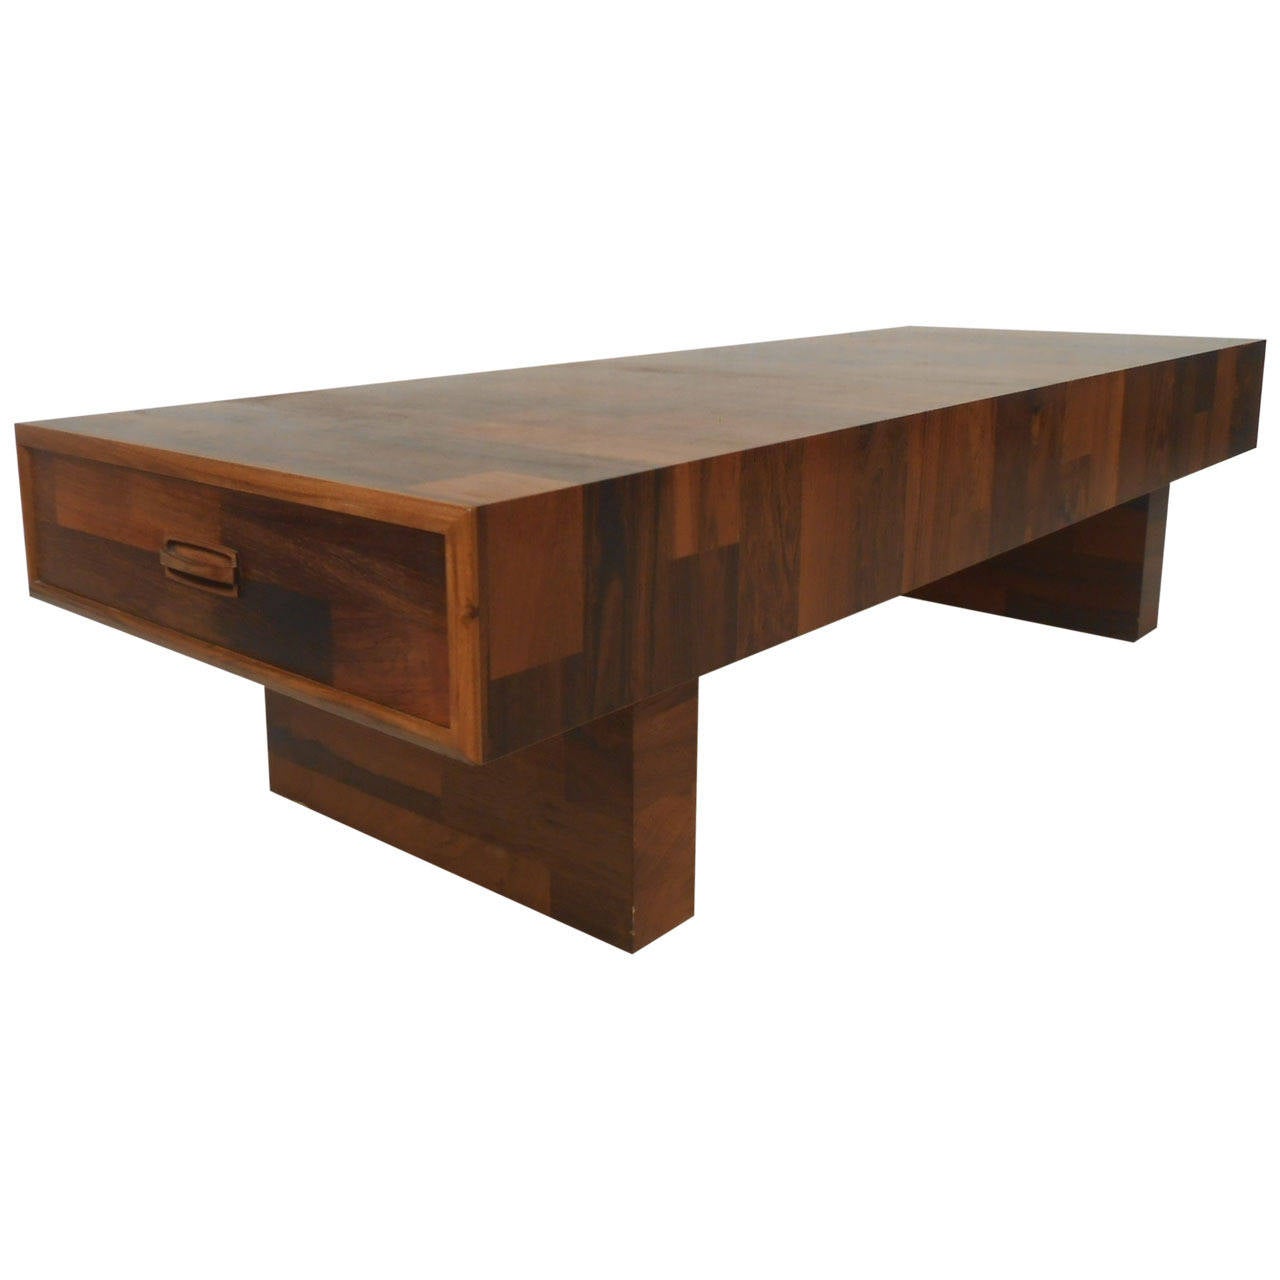 Two Drawer Modern Coffee Table at 1stdibs